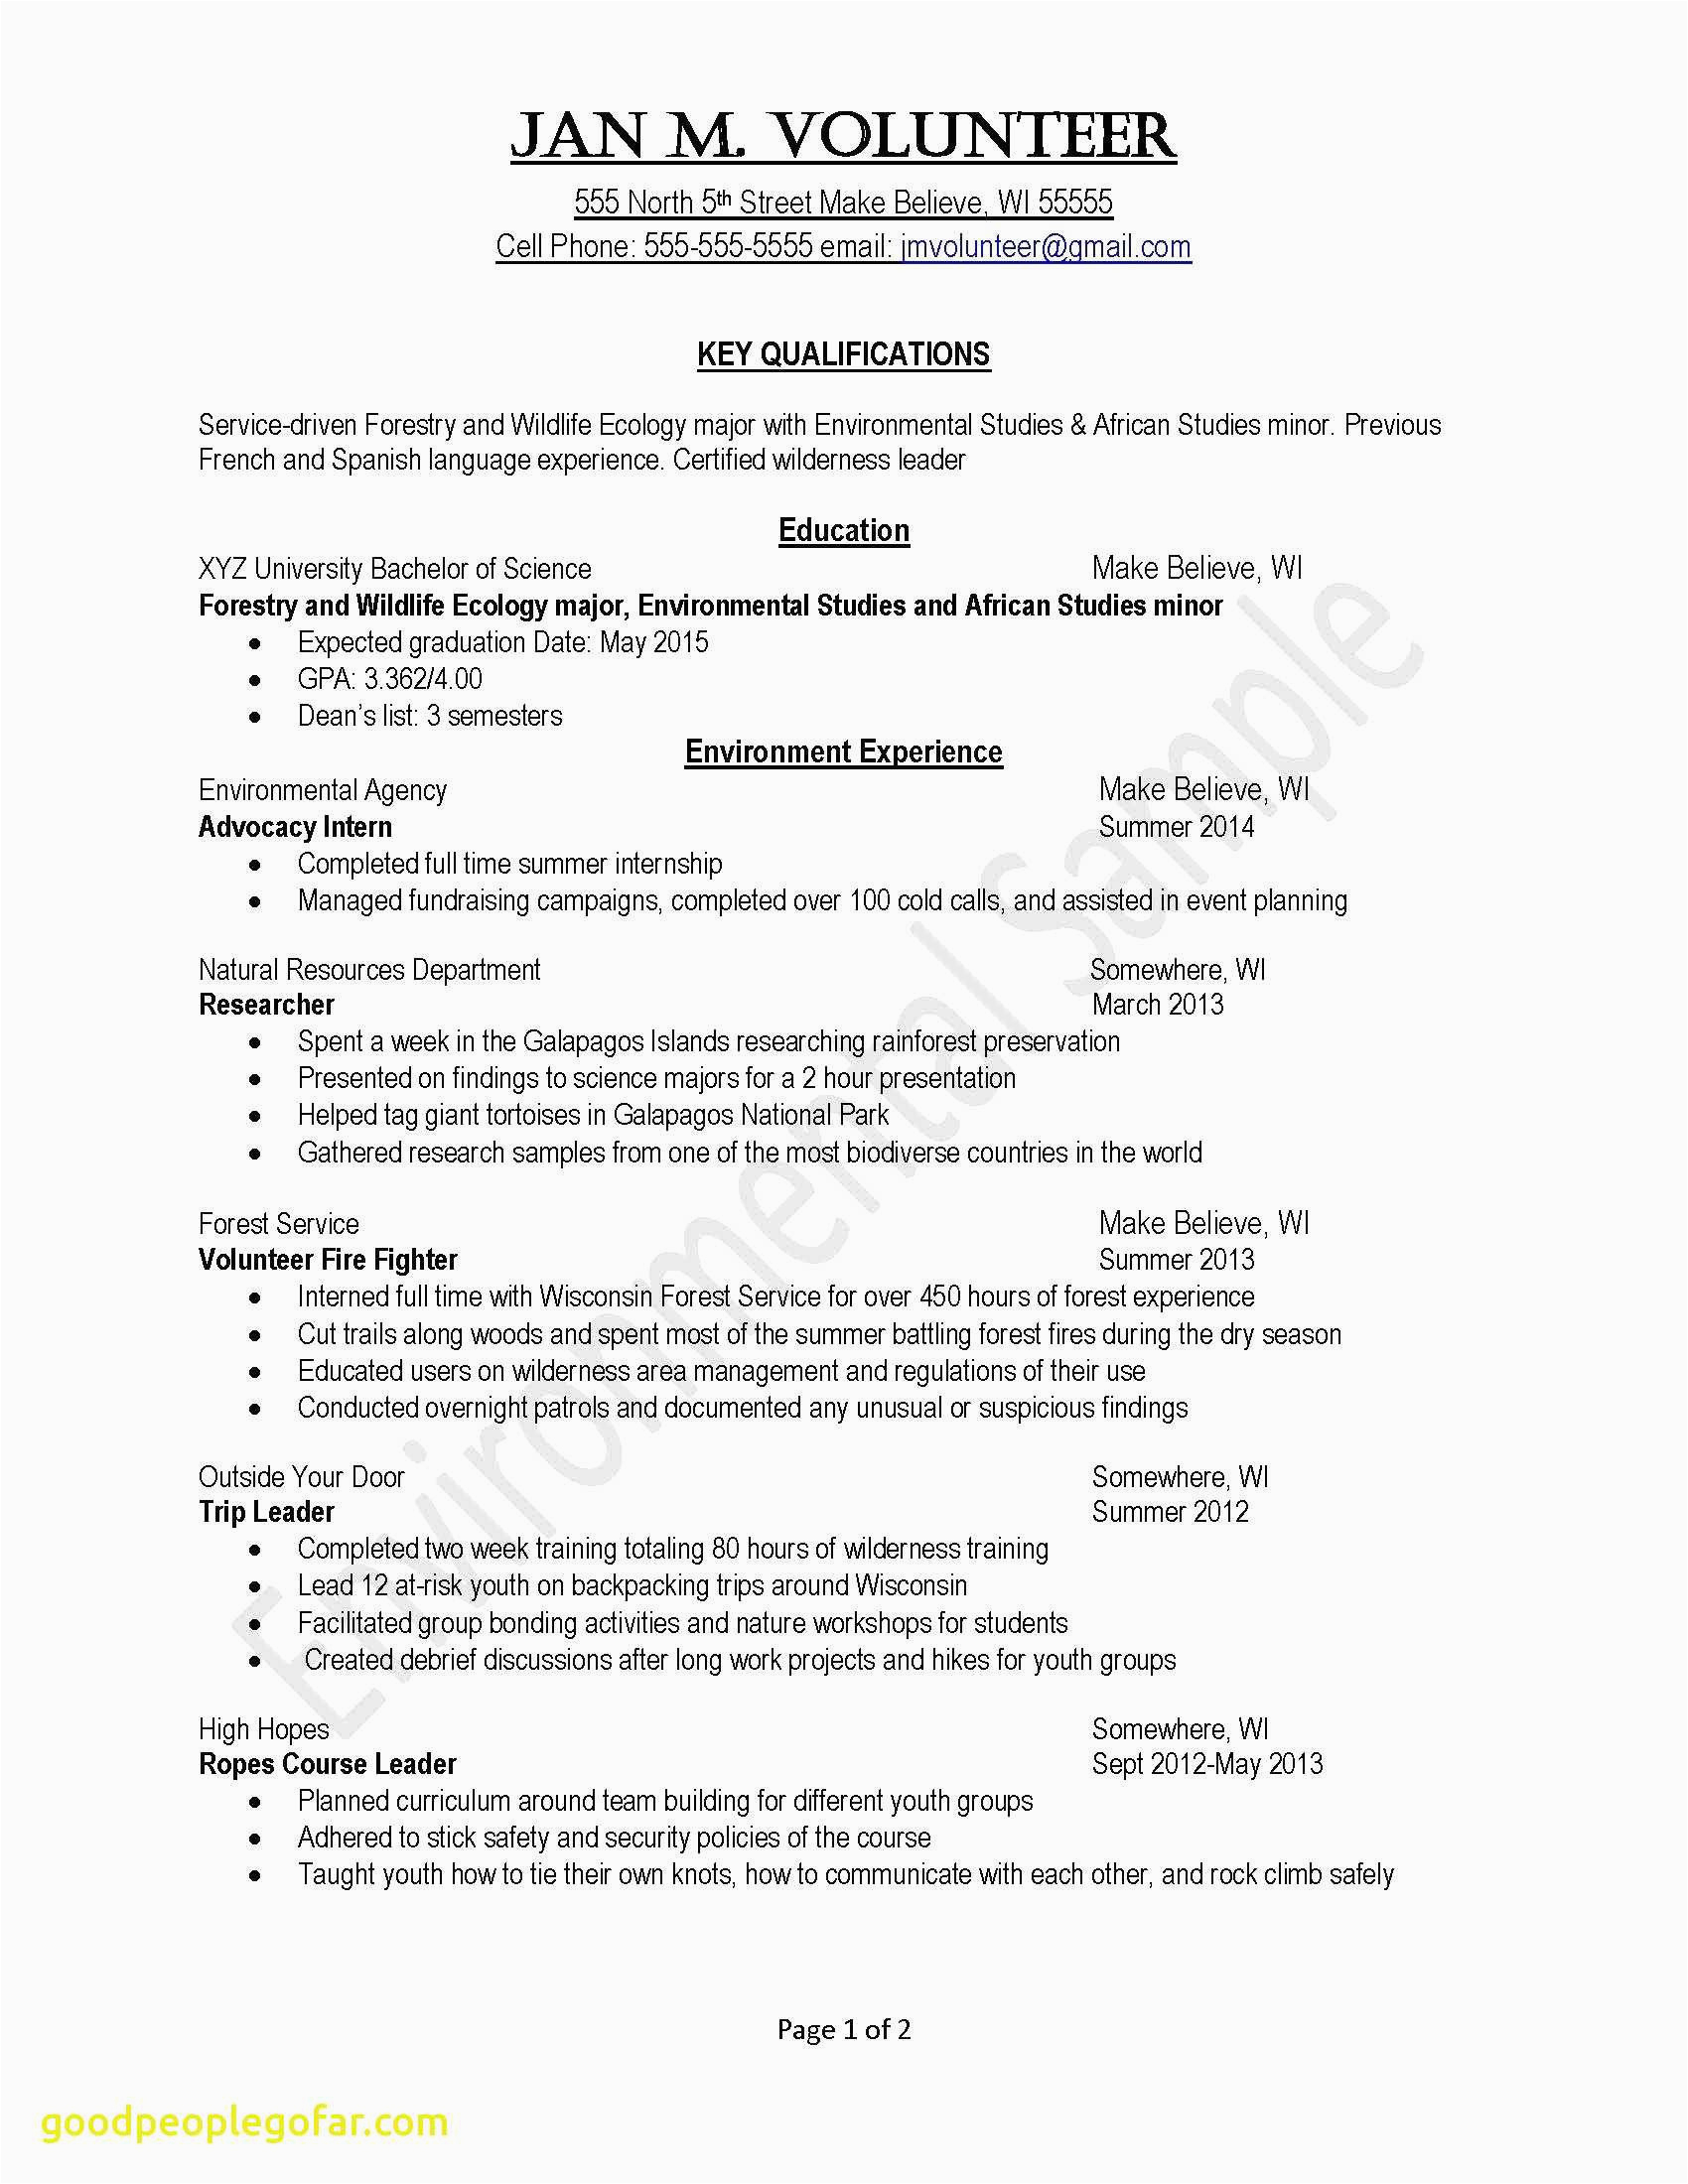 Free Resume Templates with Bullet Points 12 Bullet Point Resume Examples